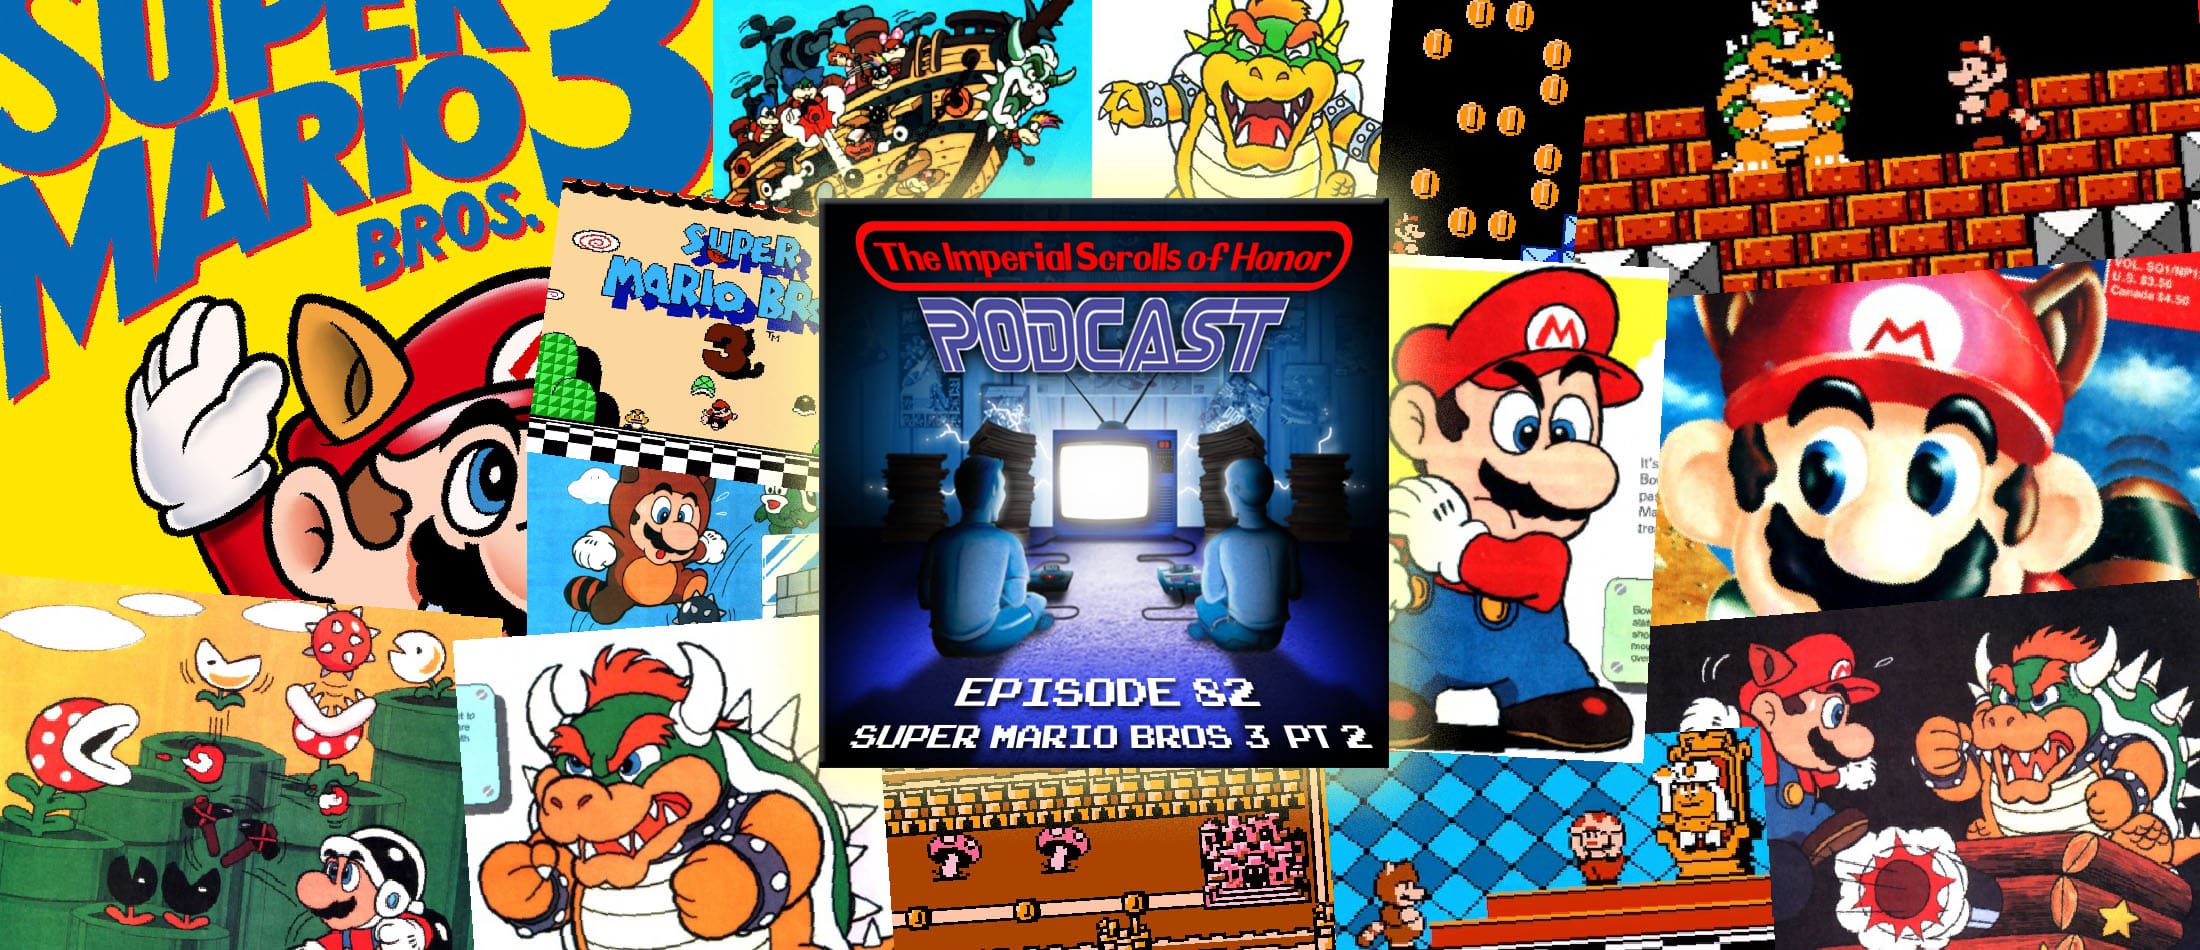 The Imperial Scrolls of Honor Podcast - Ep 82 - Super Mario Bros. 3 (NES) Pt 2